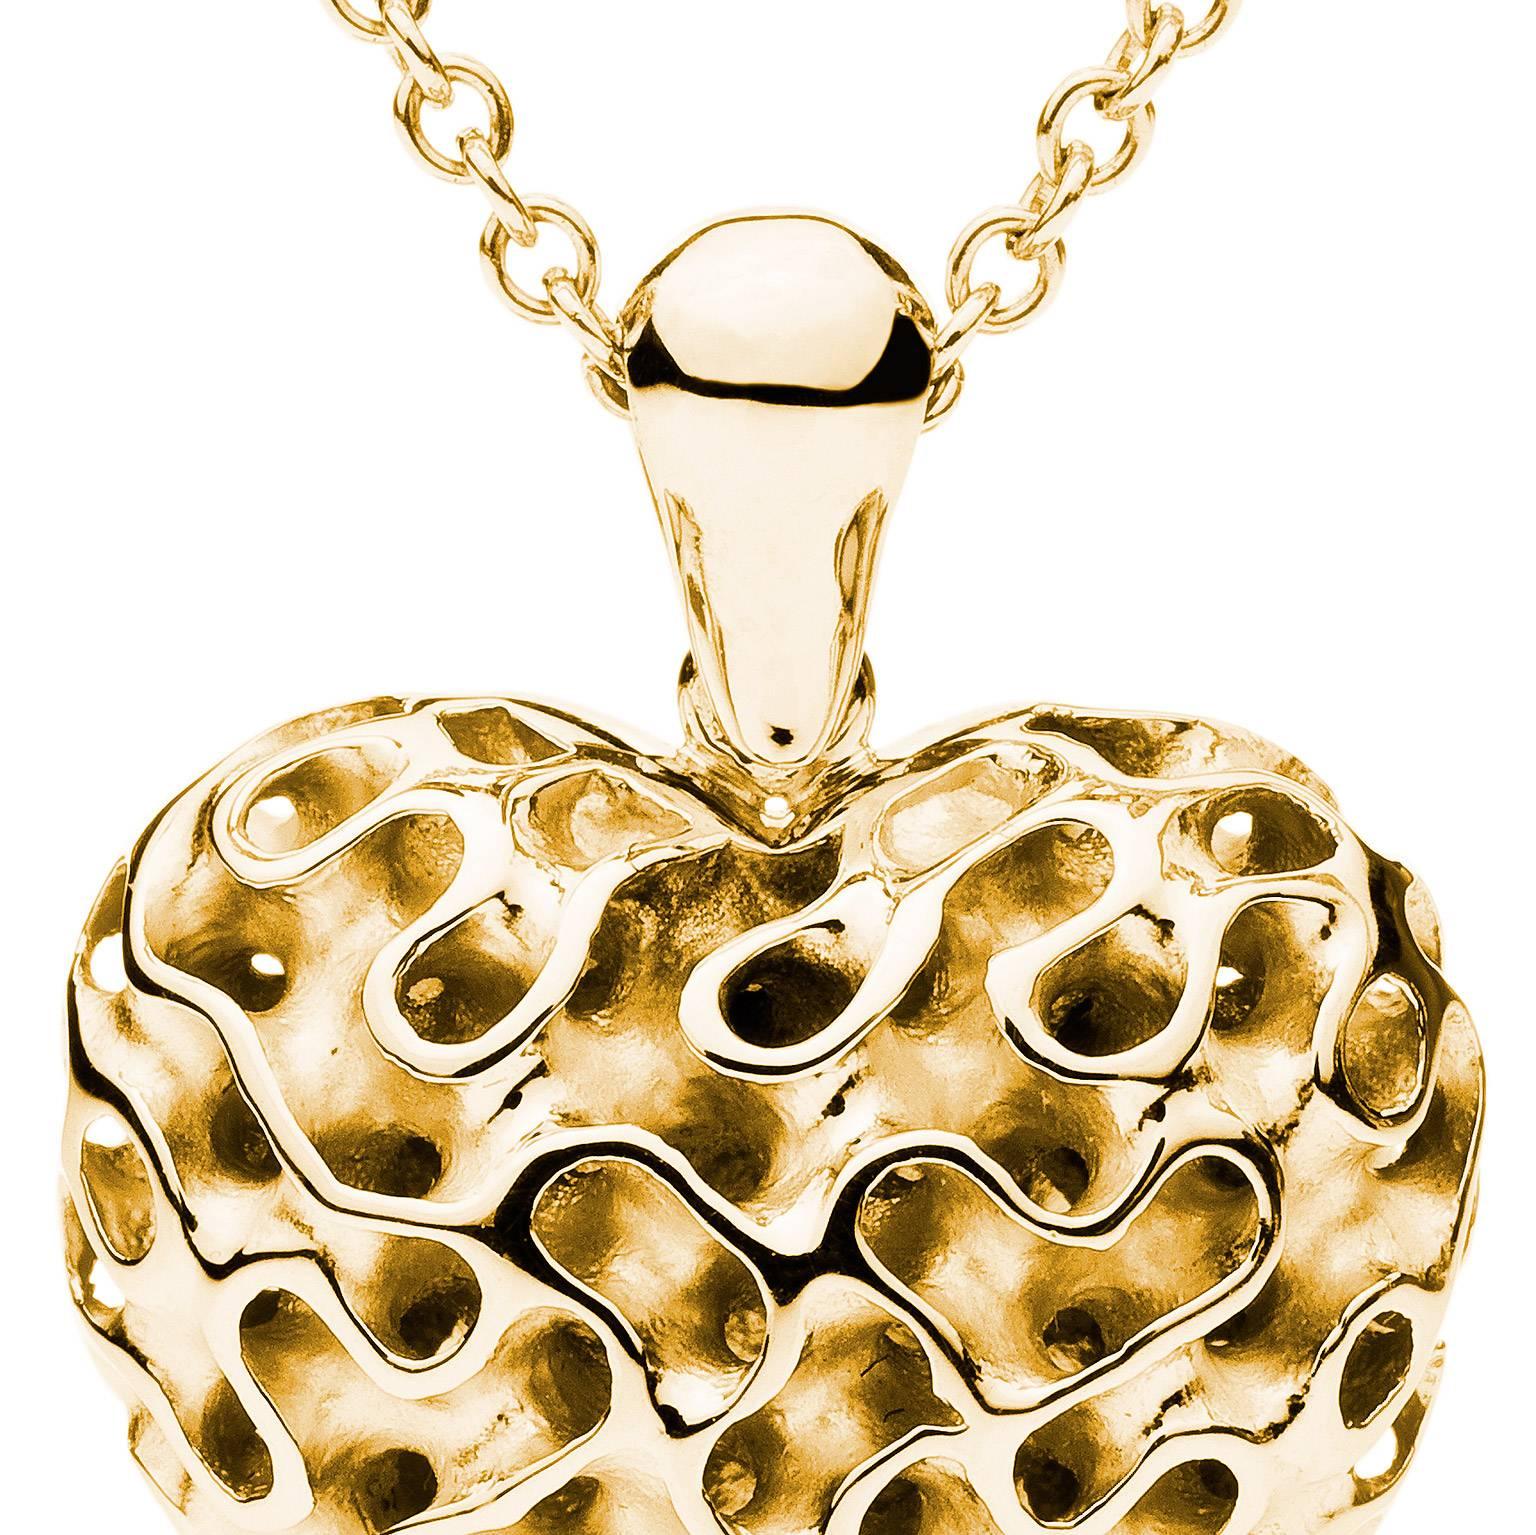 This lovely 18 Karat yellow gold heart pendant designed by Towe Norlen in 2009, is shaped as a perfectly curved heart with a prominently rounded body. It is built up from the characteristic open-work Towe Silk pattern. The winding Silk pattern